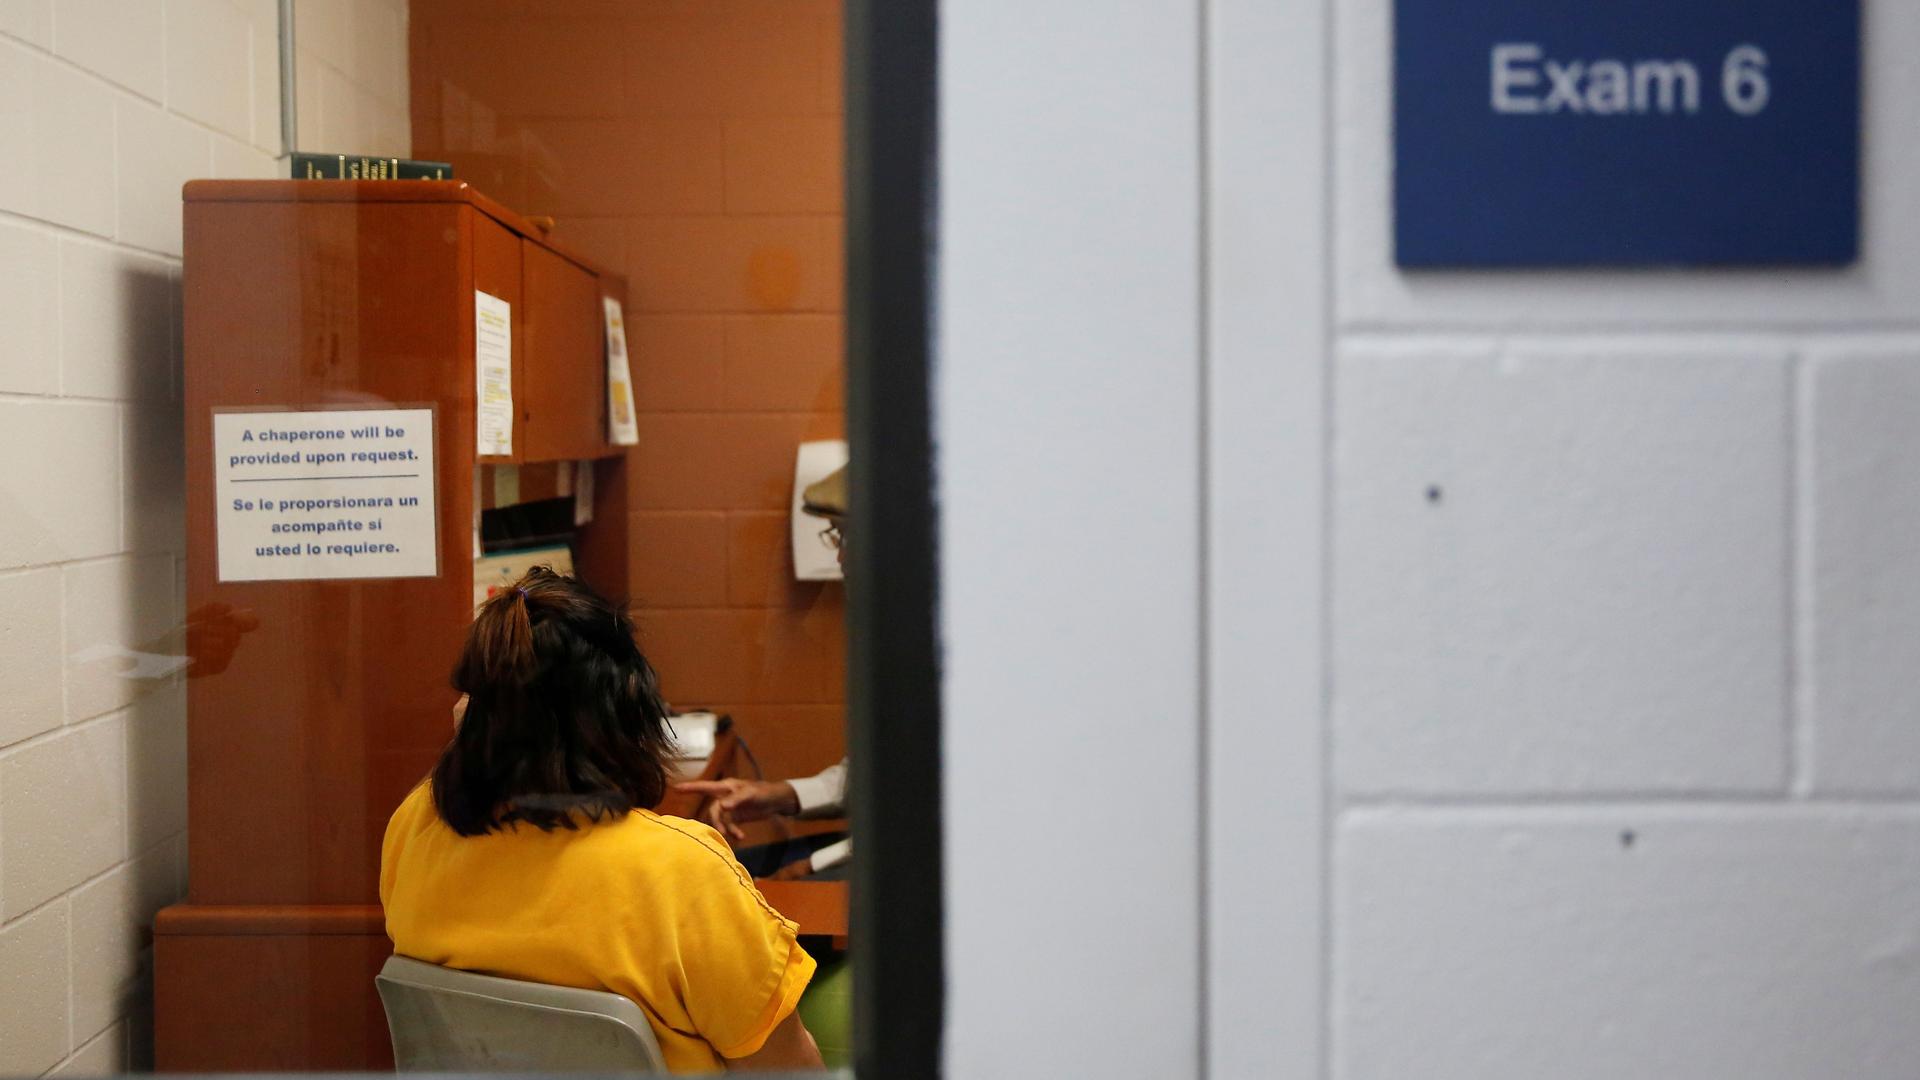 A detainee talks with an employee in an exam room in the medial unit during a media tour at Northwest ICE Processing Center, one of 31 dedicated ICE facilities that house immigration detainees, in Tacoma, Washington, Dec. 16, 2019. 